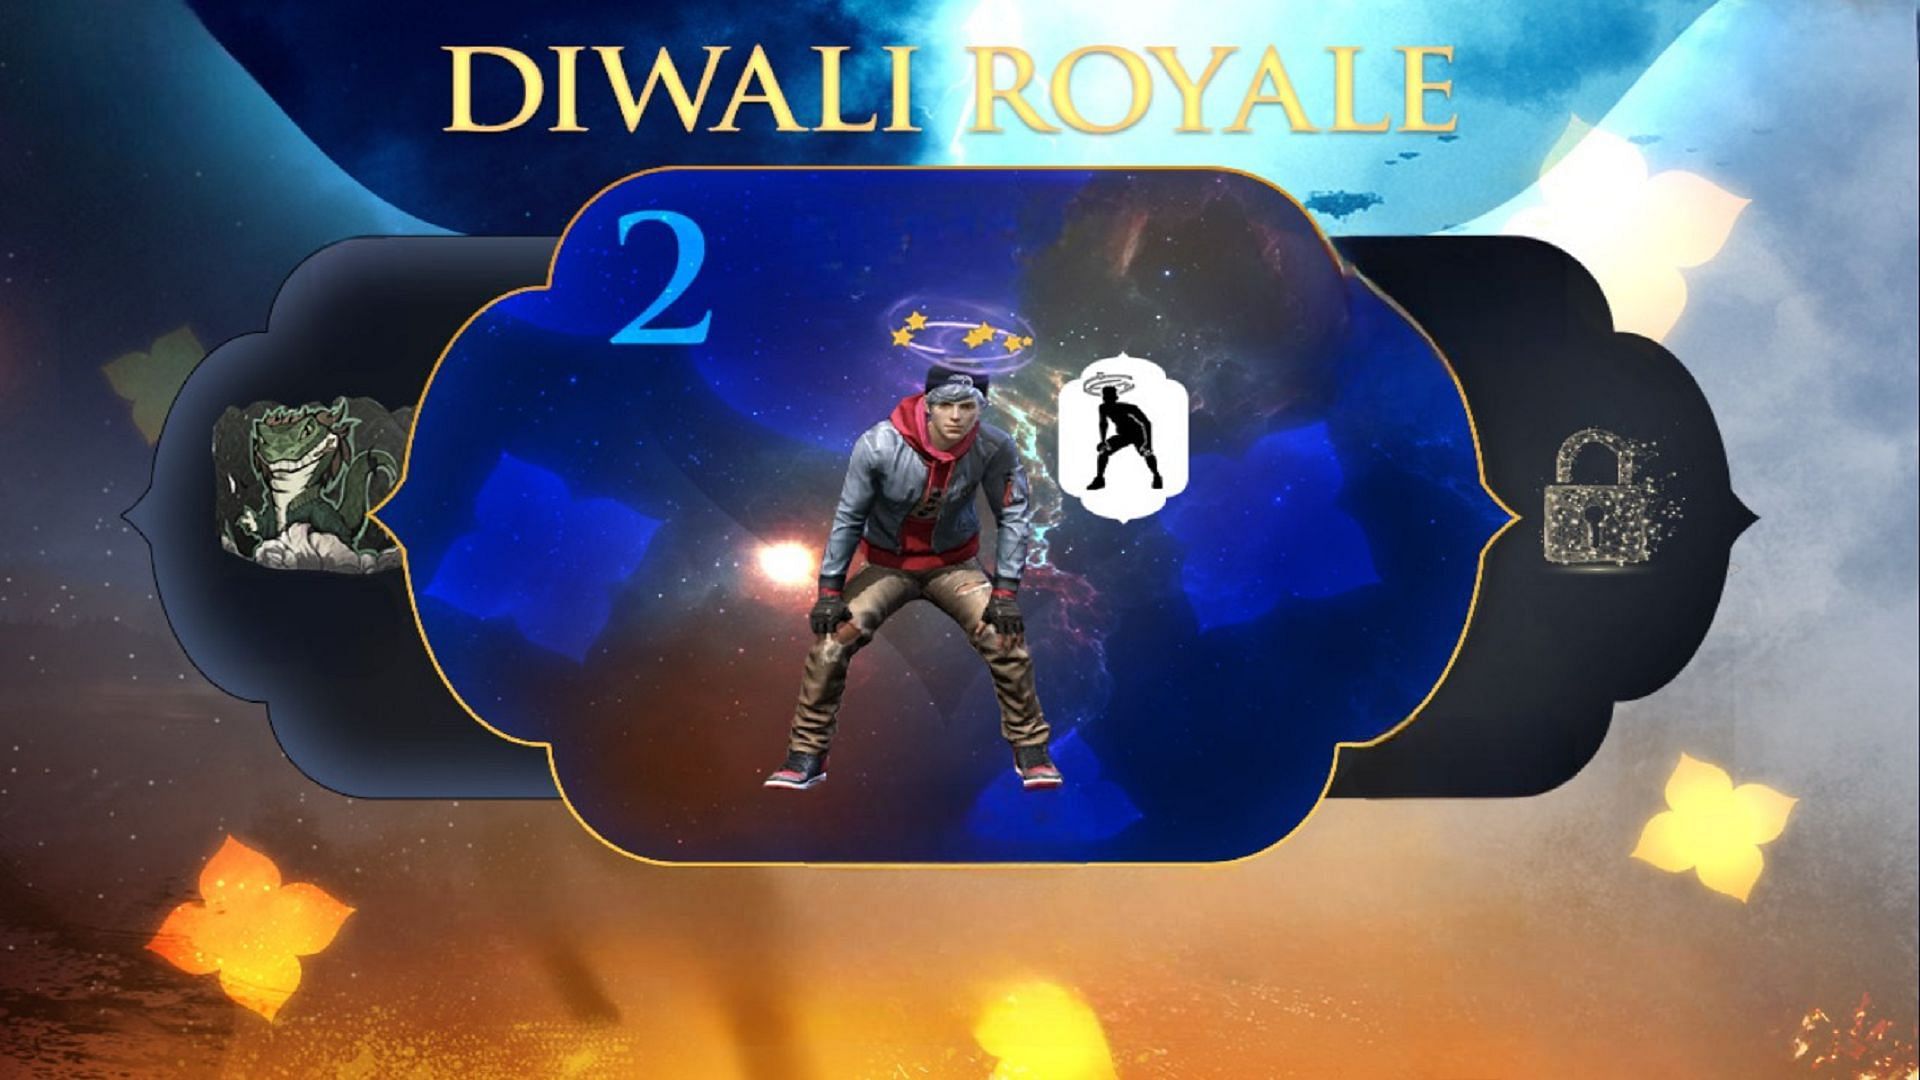 Diwali Royale 2 has been added to Free Fire (Image via Garena)